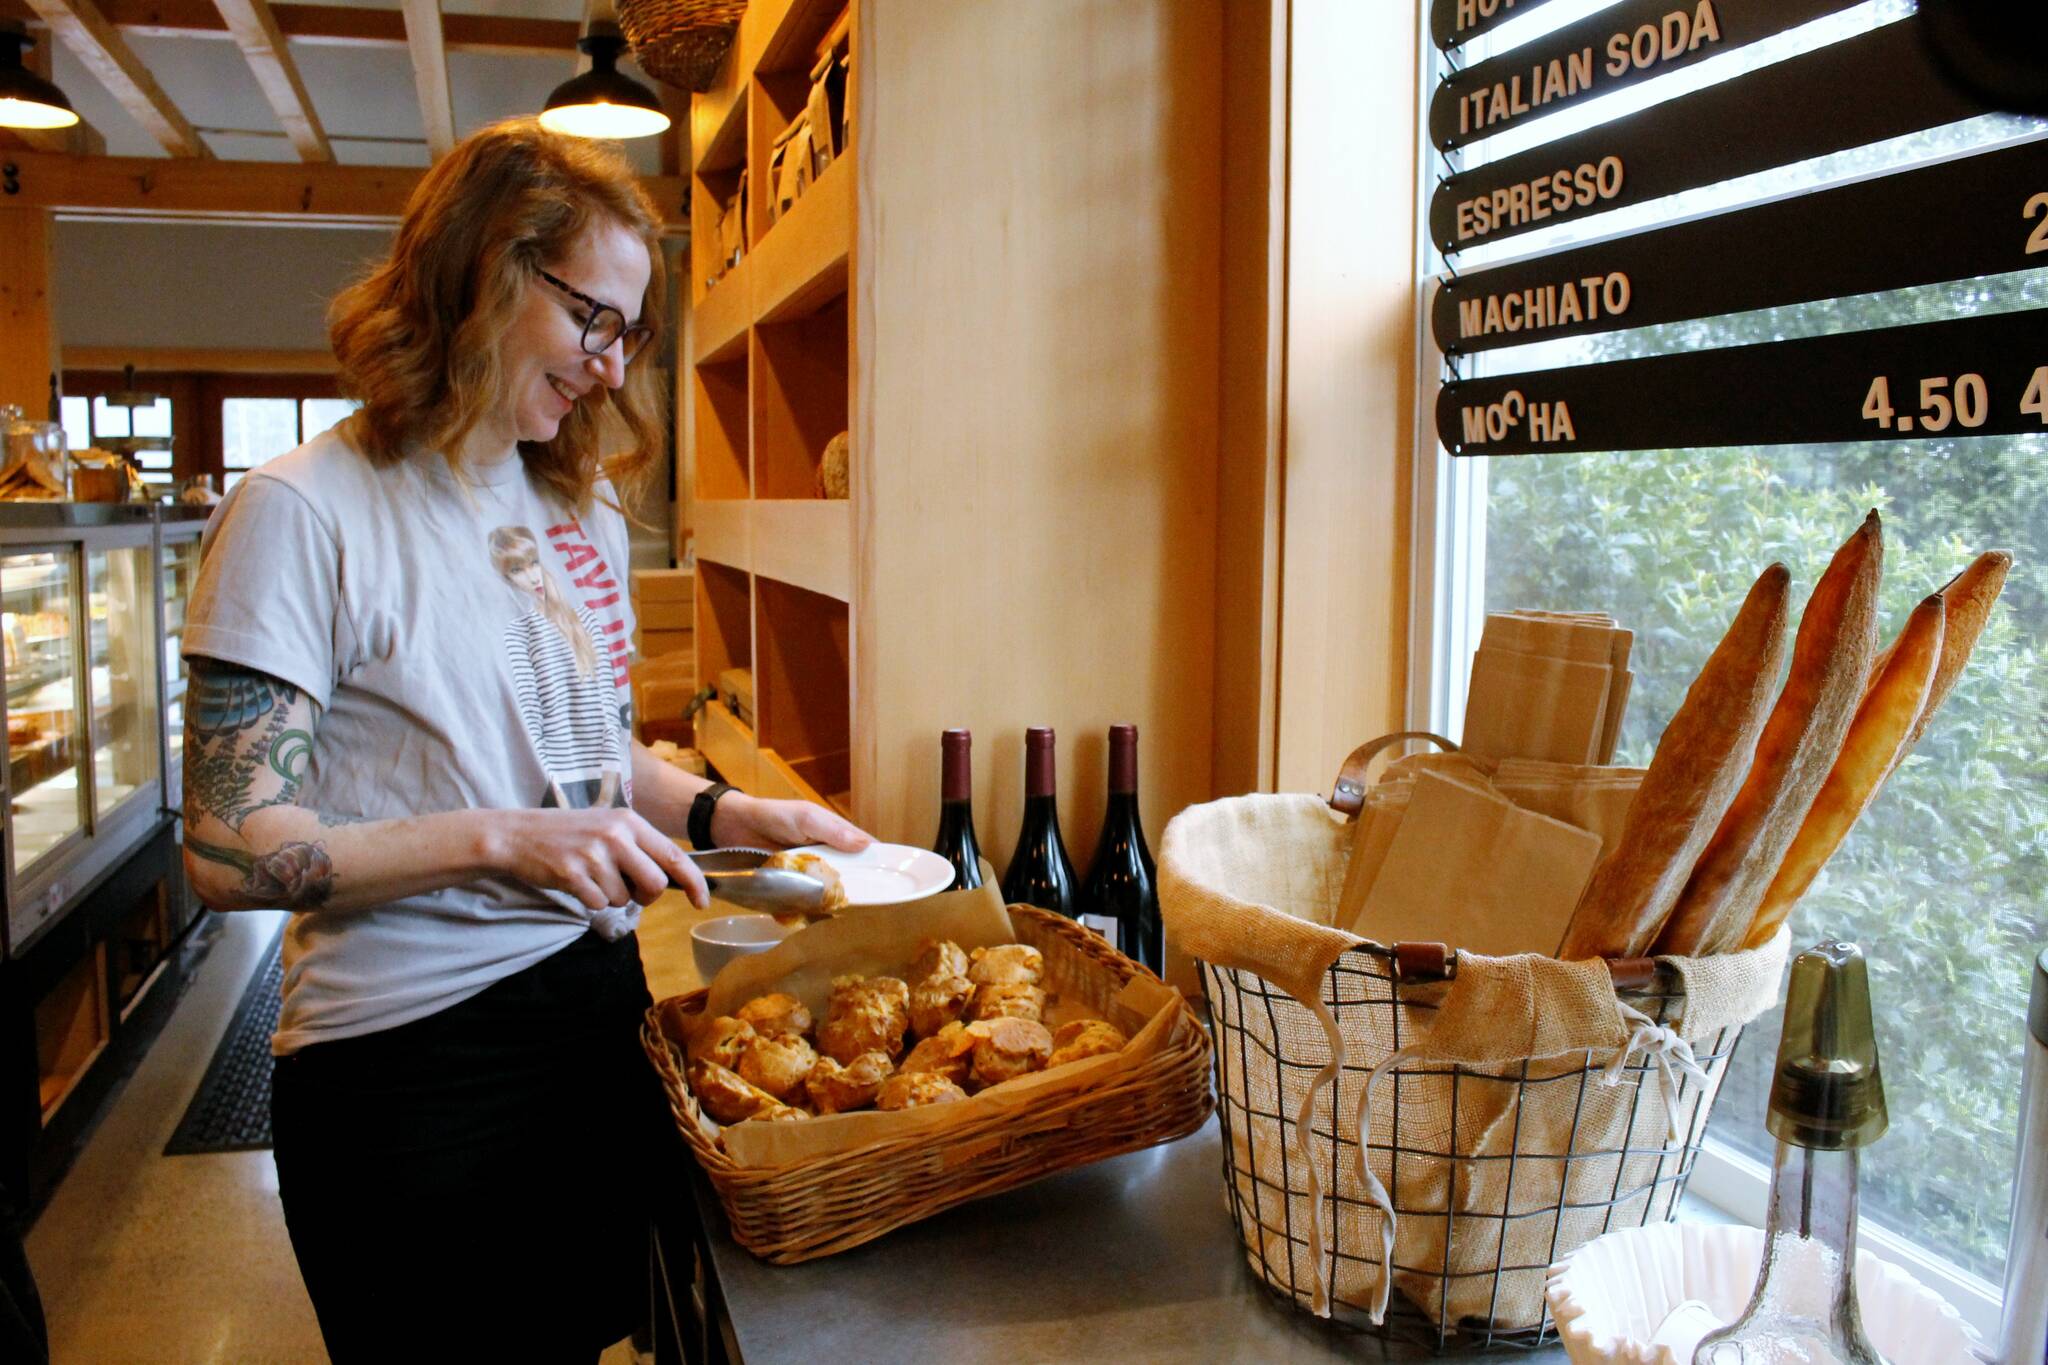 Photos by Kira Erickson/South Whidbey Record
Hannah McCabe, the manager of Seabiscuit Bakery, grabs a gougère to serve.